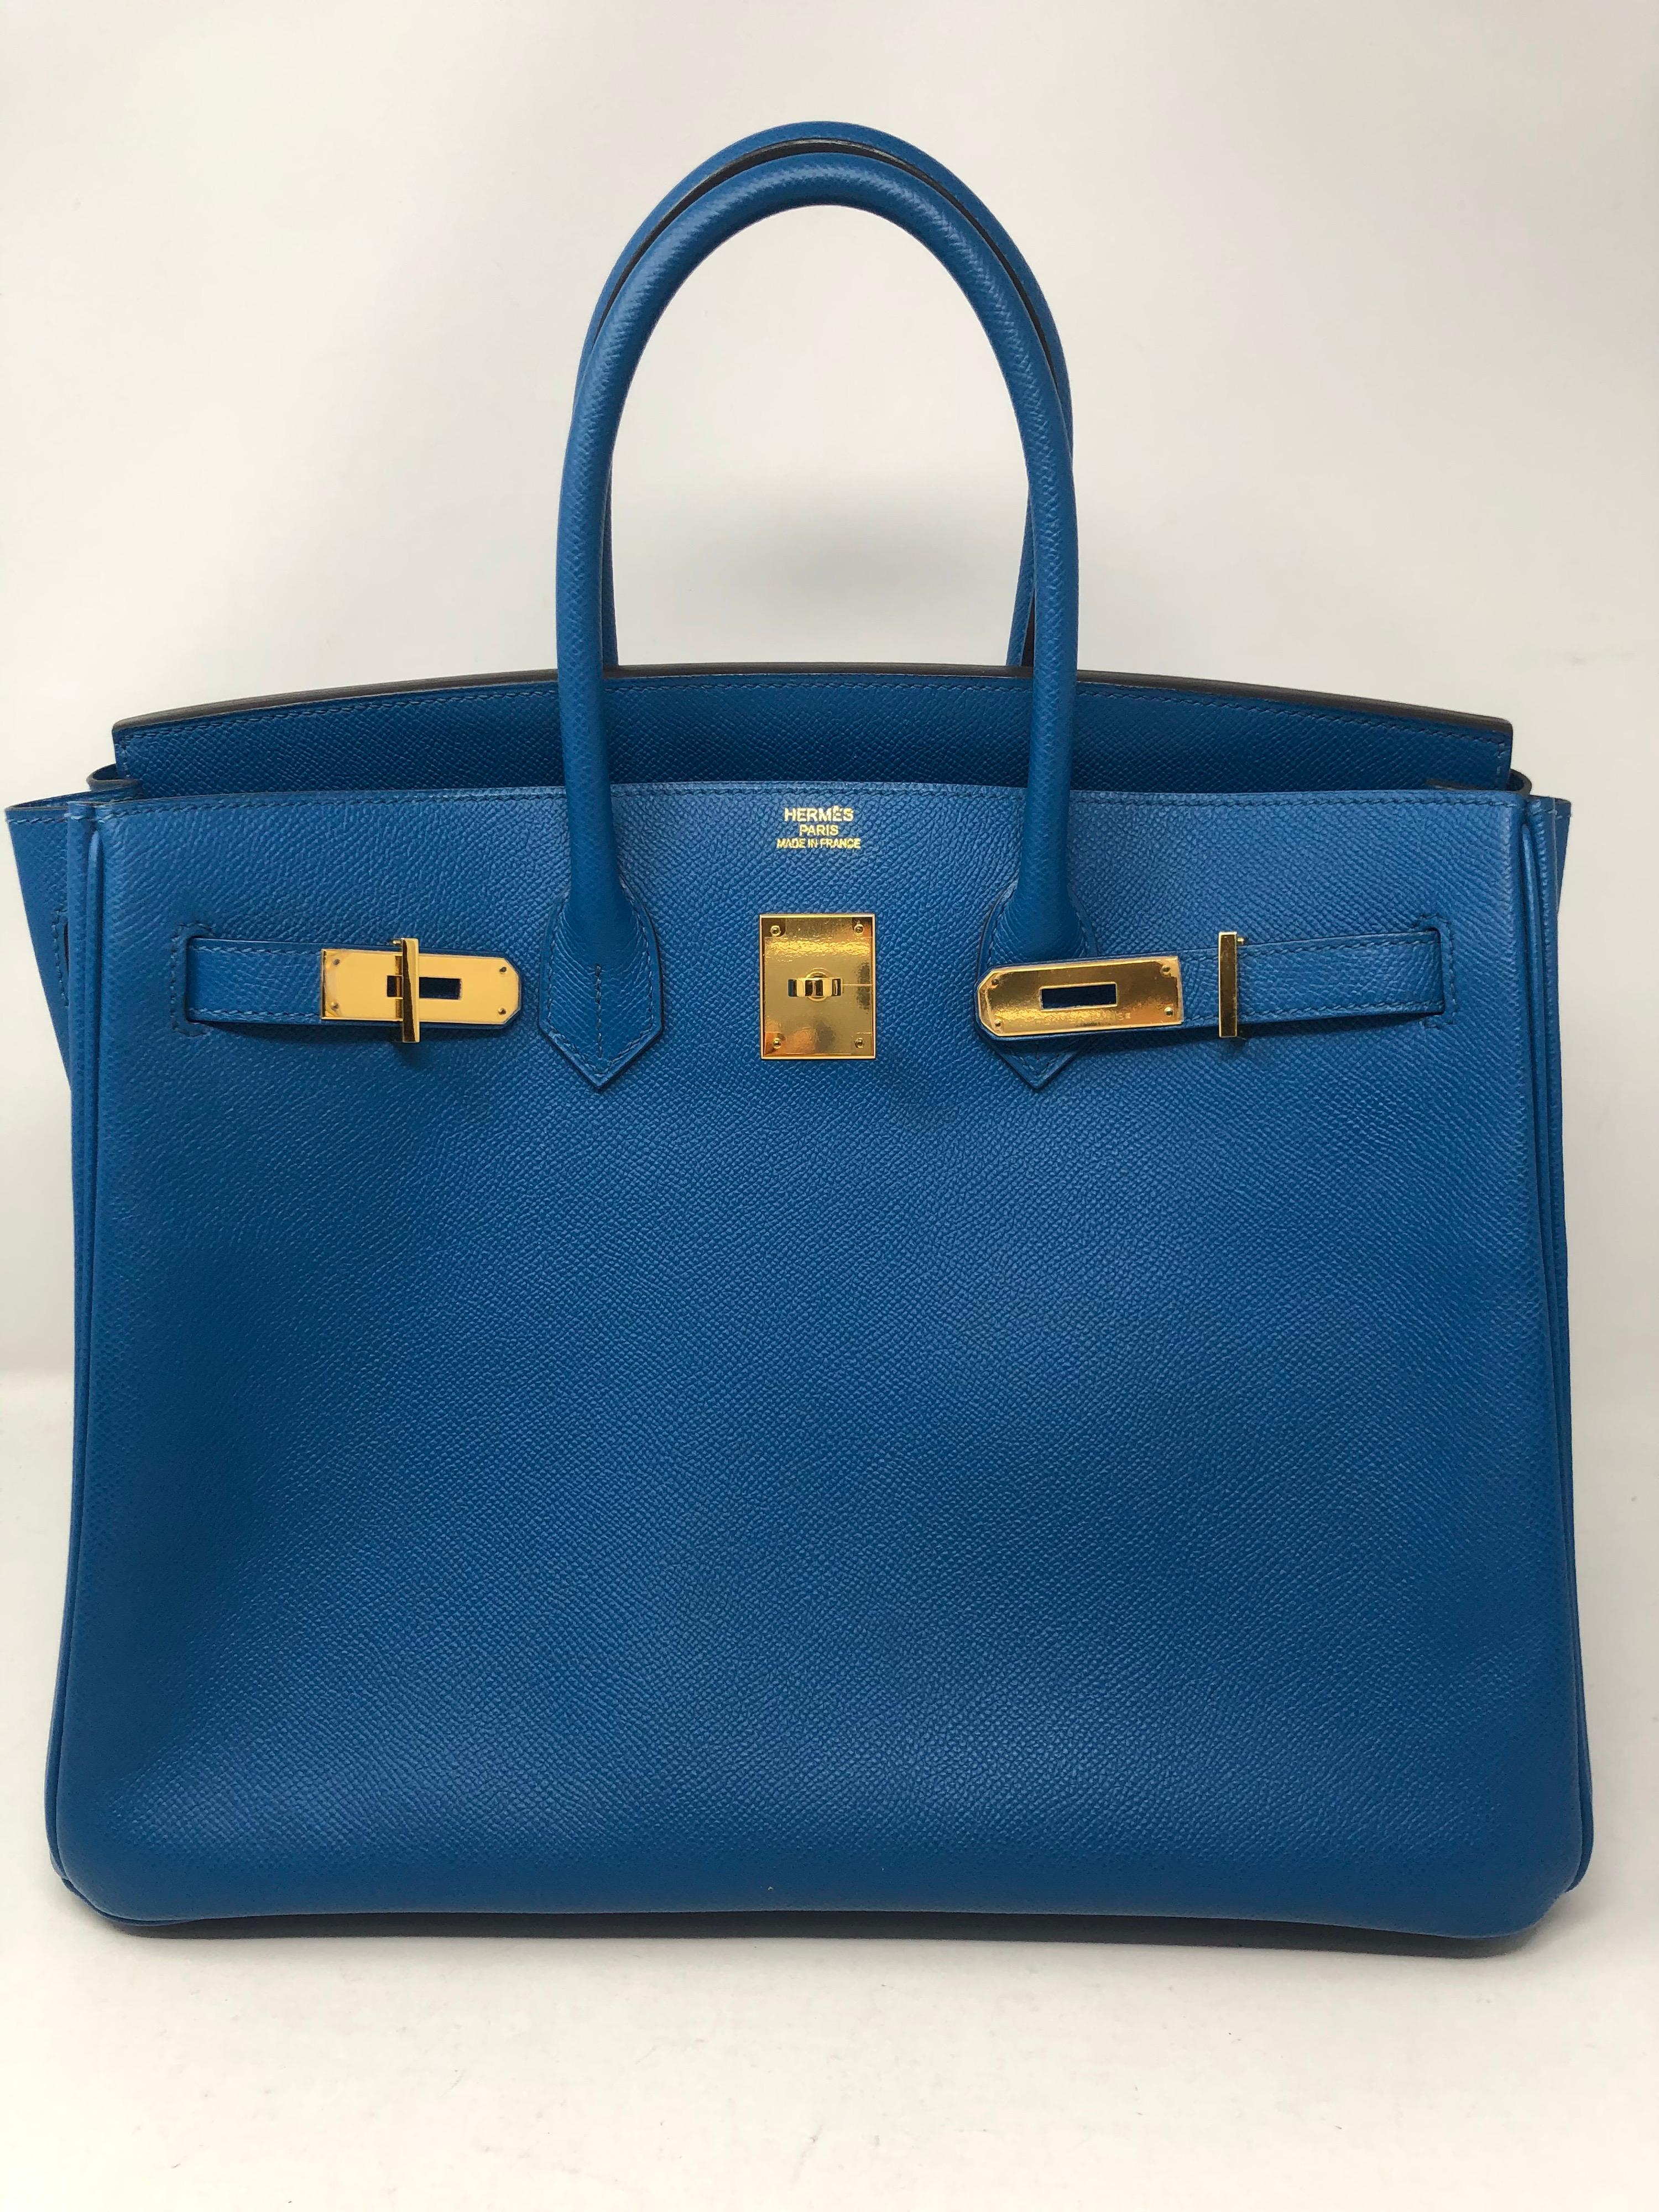 Hermes Birkin Blue Izmir 35 Bag. Gold hardware. Epsom leather. Mint condition. Looks like new. Beautiful vibrant blue color. Rare combo. Plastic is still on hardware. Includes clochette, lock, keys and dust cover. Guaranteed authentic. Don't miss